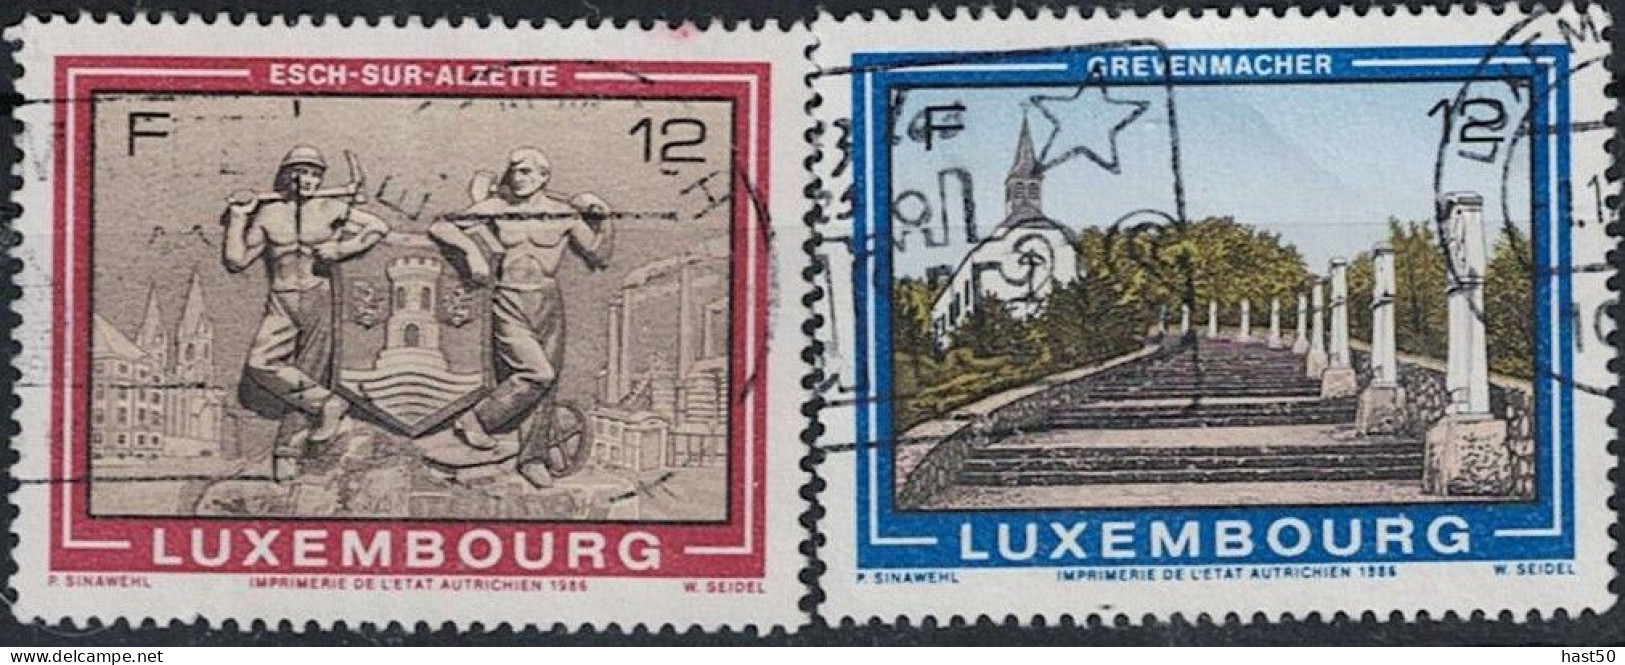 Luxemburg - Sehenswürdigkeiten (MiNr: 1160/1) 1986 - Gest Used Obl - Used Stamps